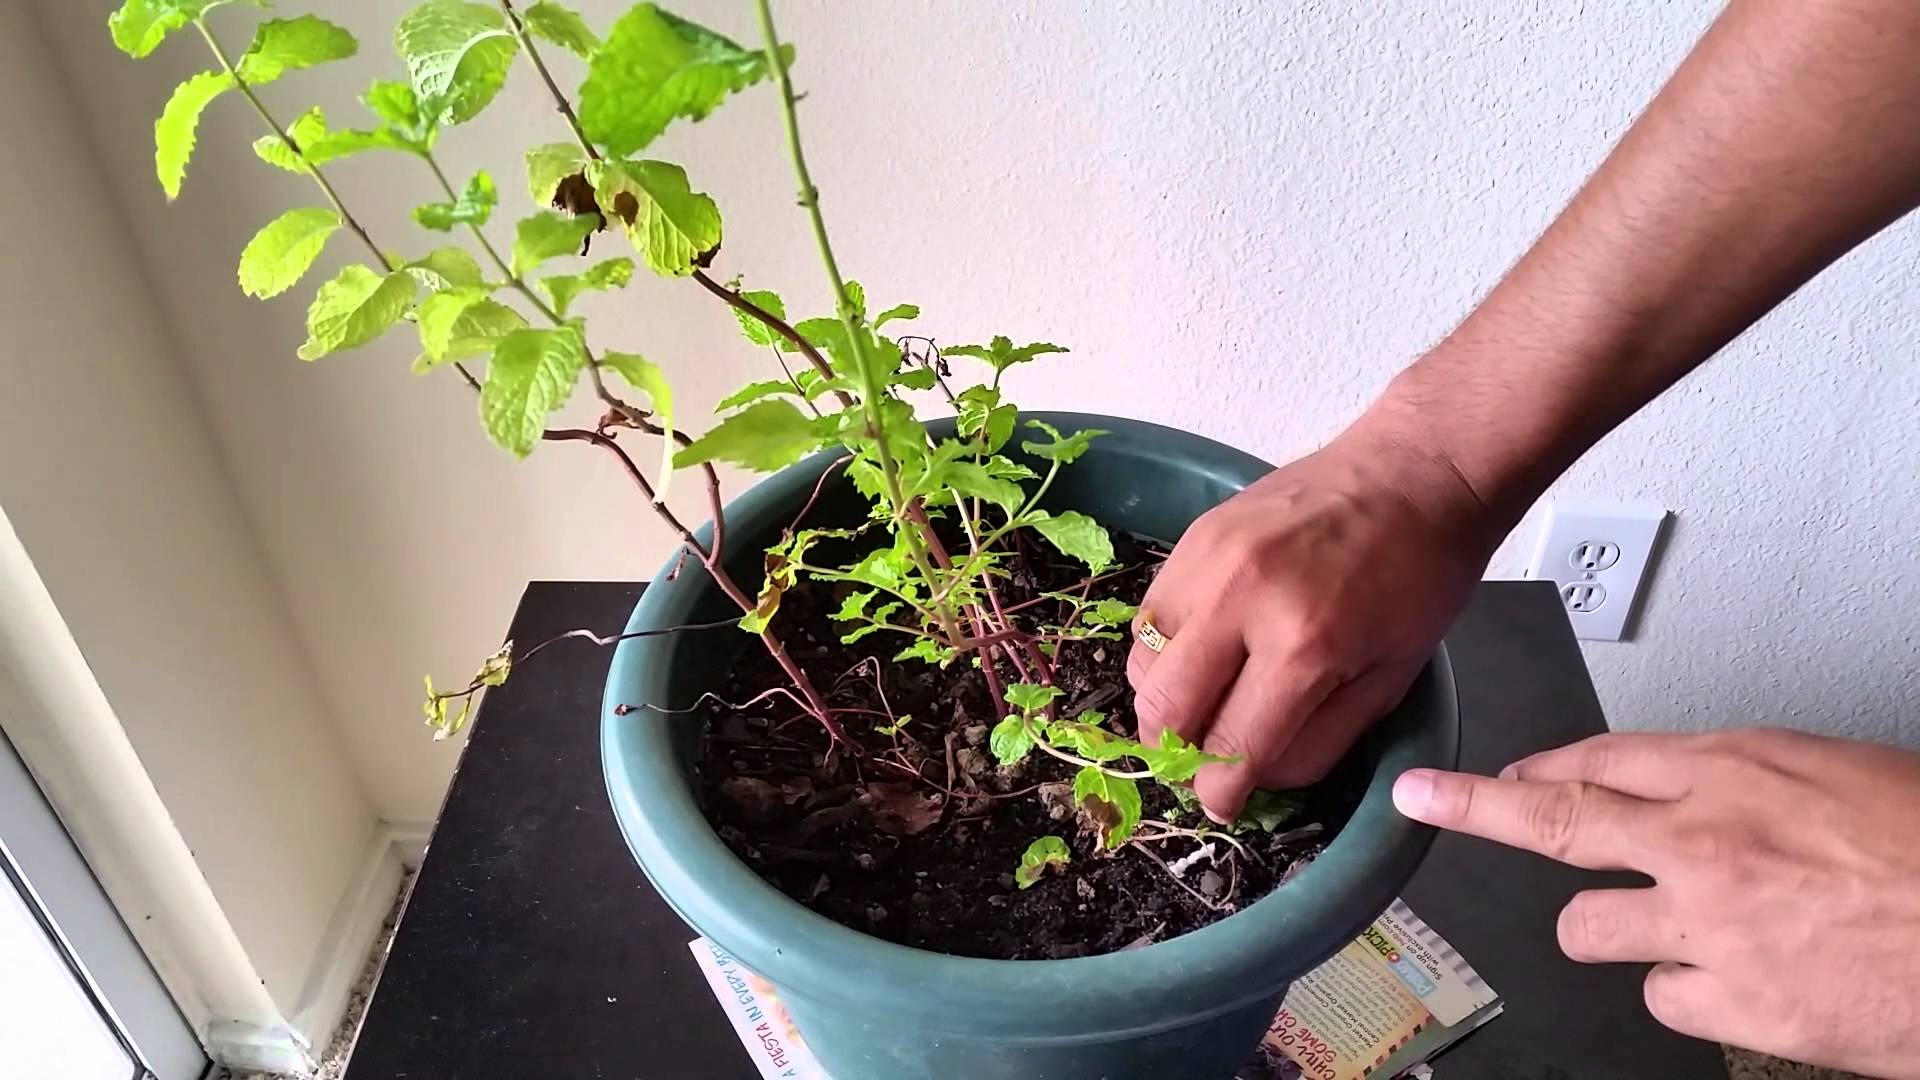 How to grow Mint in Pot at Home Patio Plant Mint - YouTube